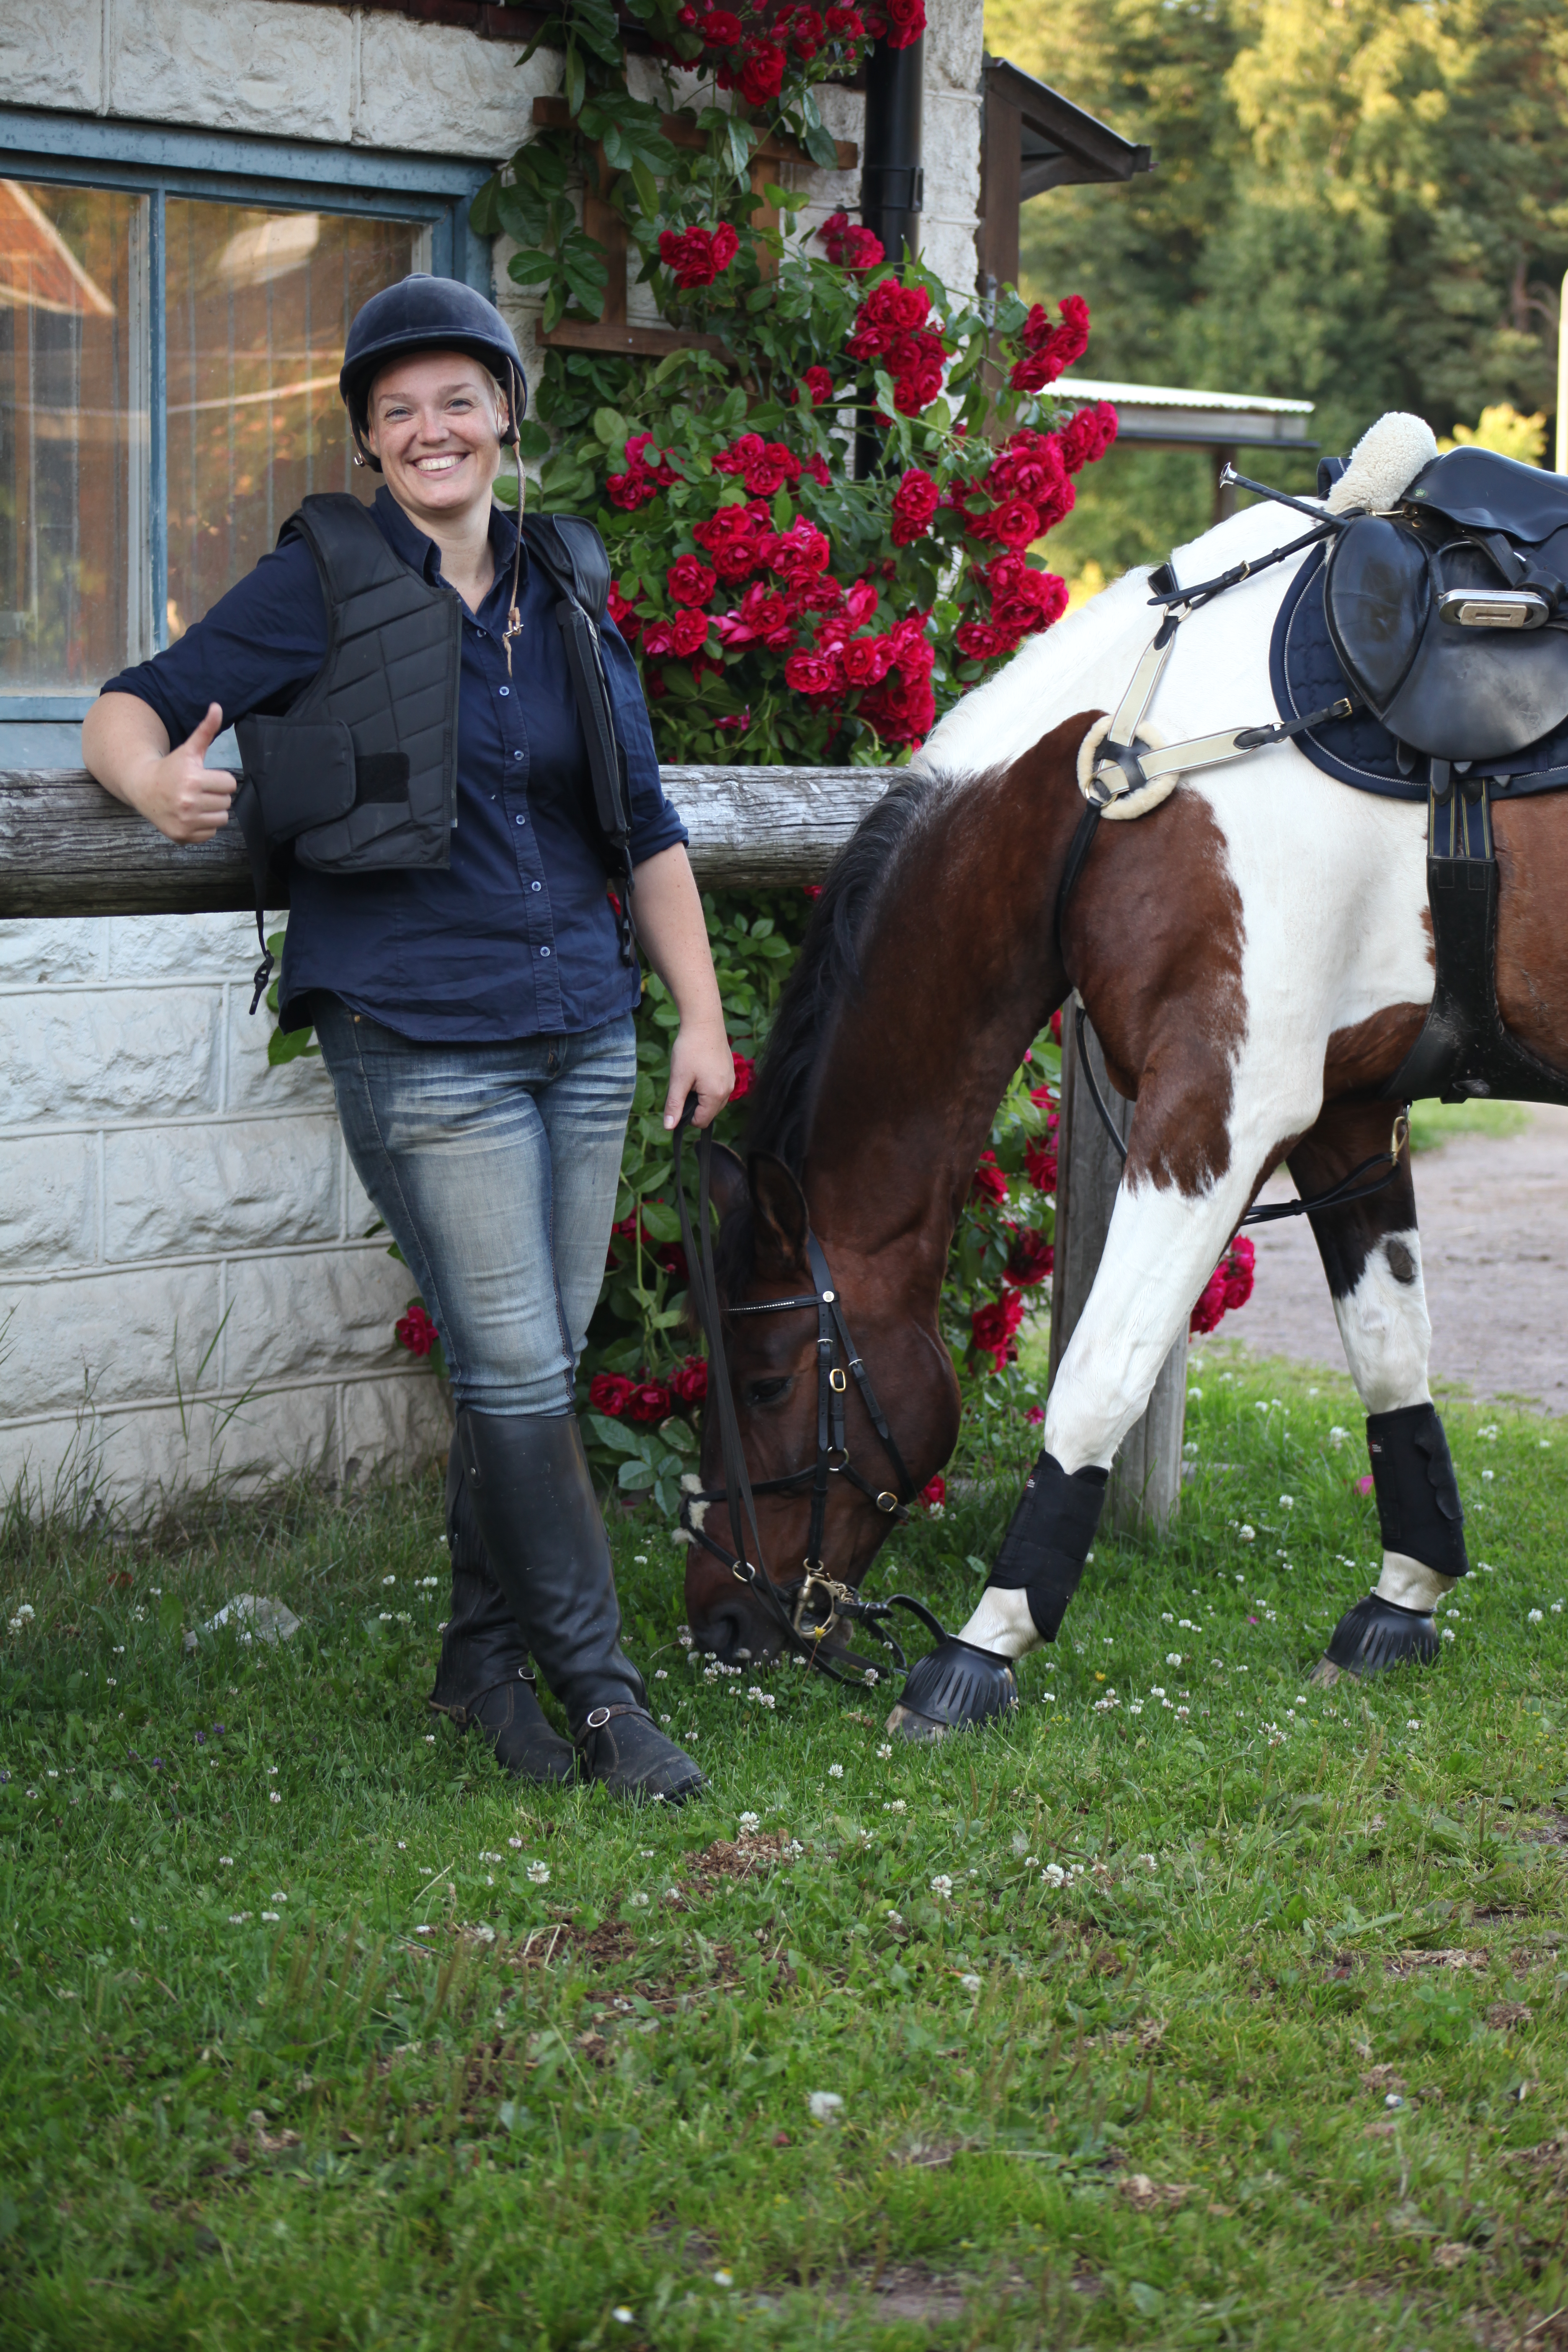 Doing an eventing add for one of the region´s equestrian clubs. Mariestad, Sweden 2013